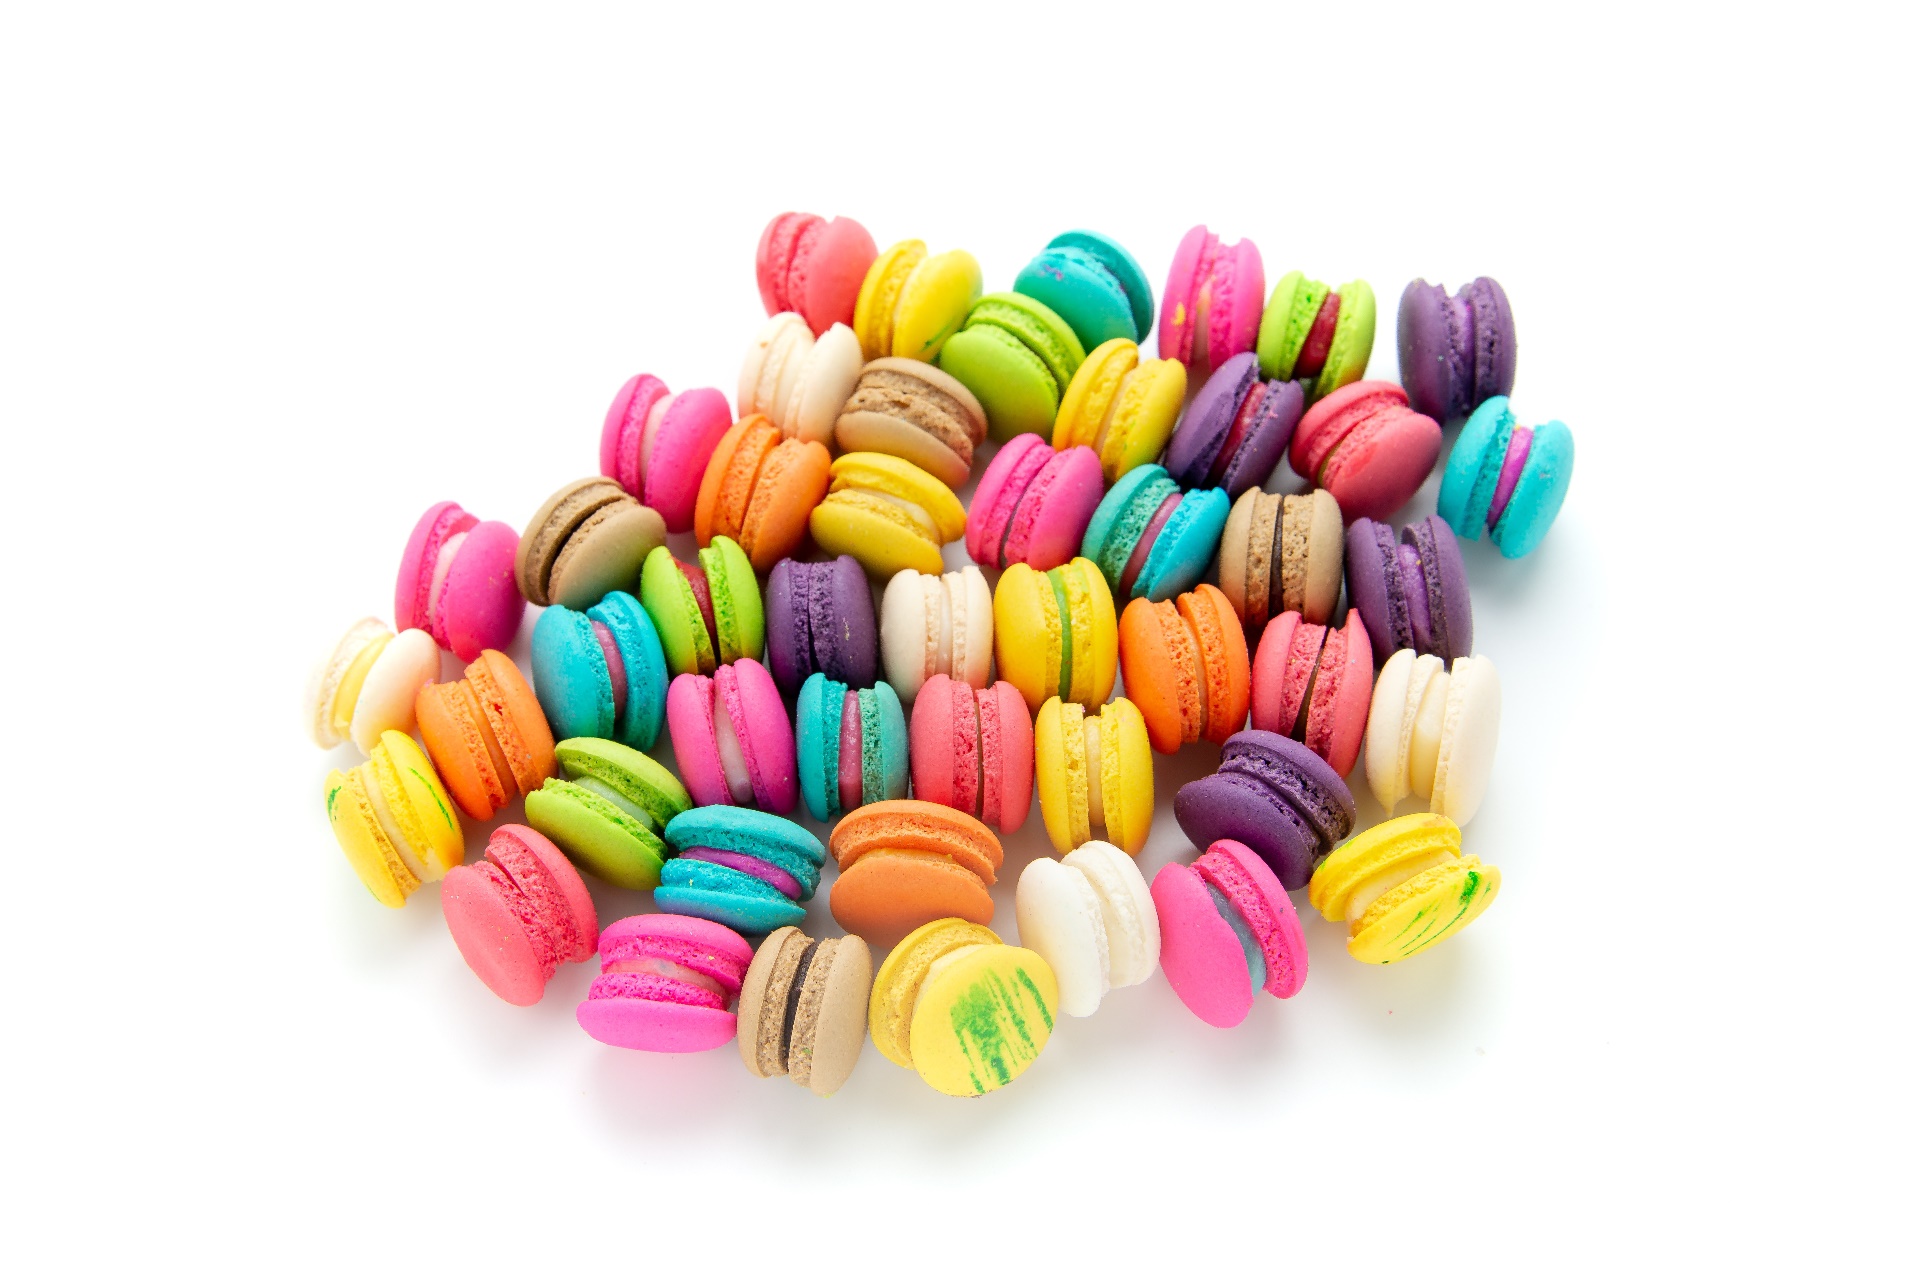 General 1920x1282 white background food sweets colorful macarons cookies